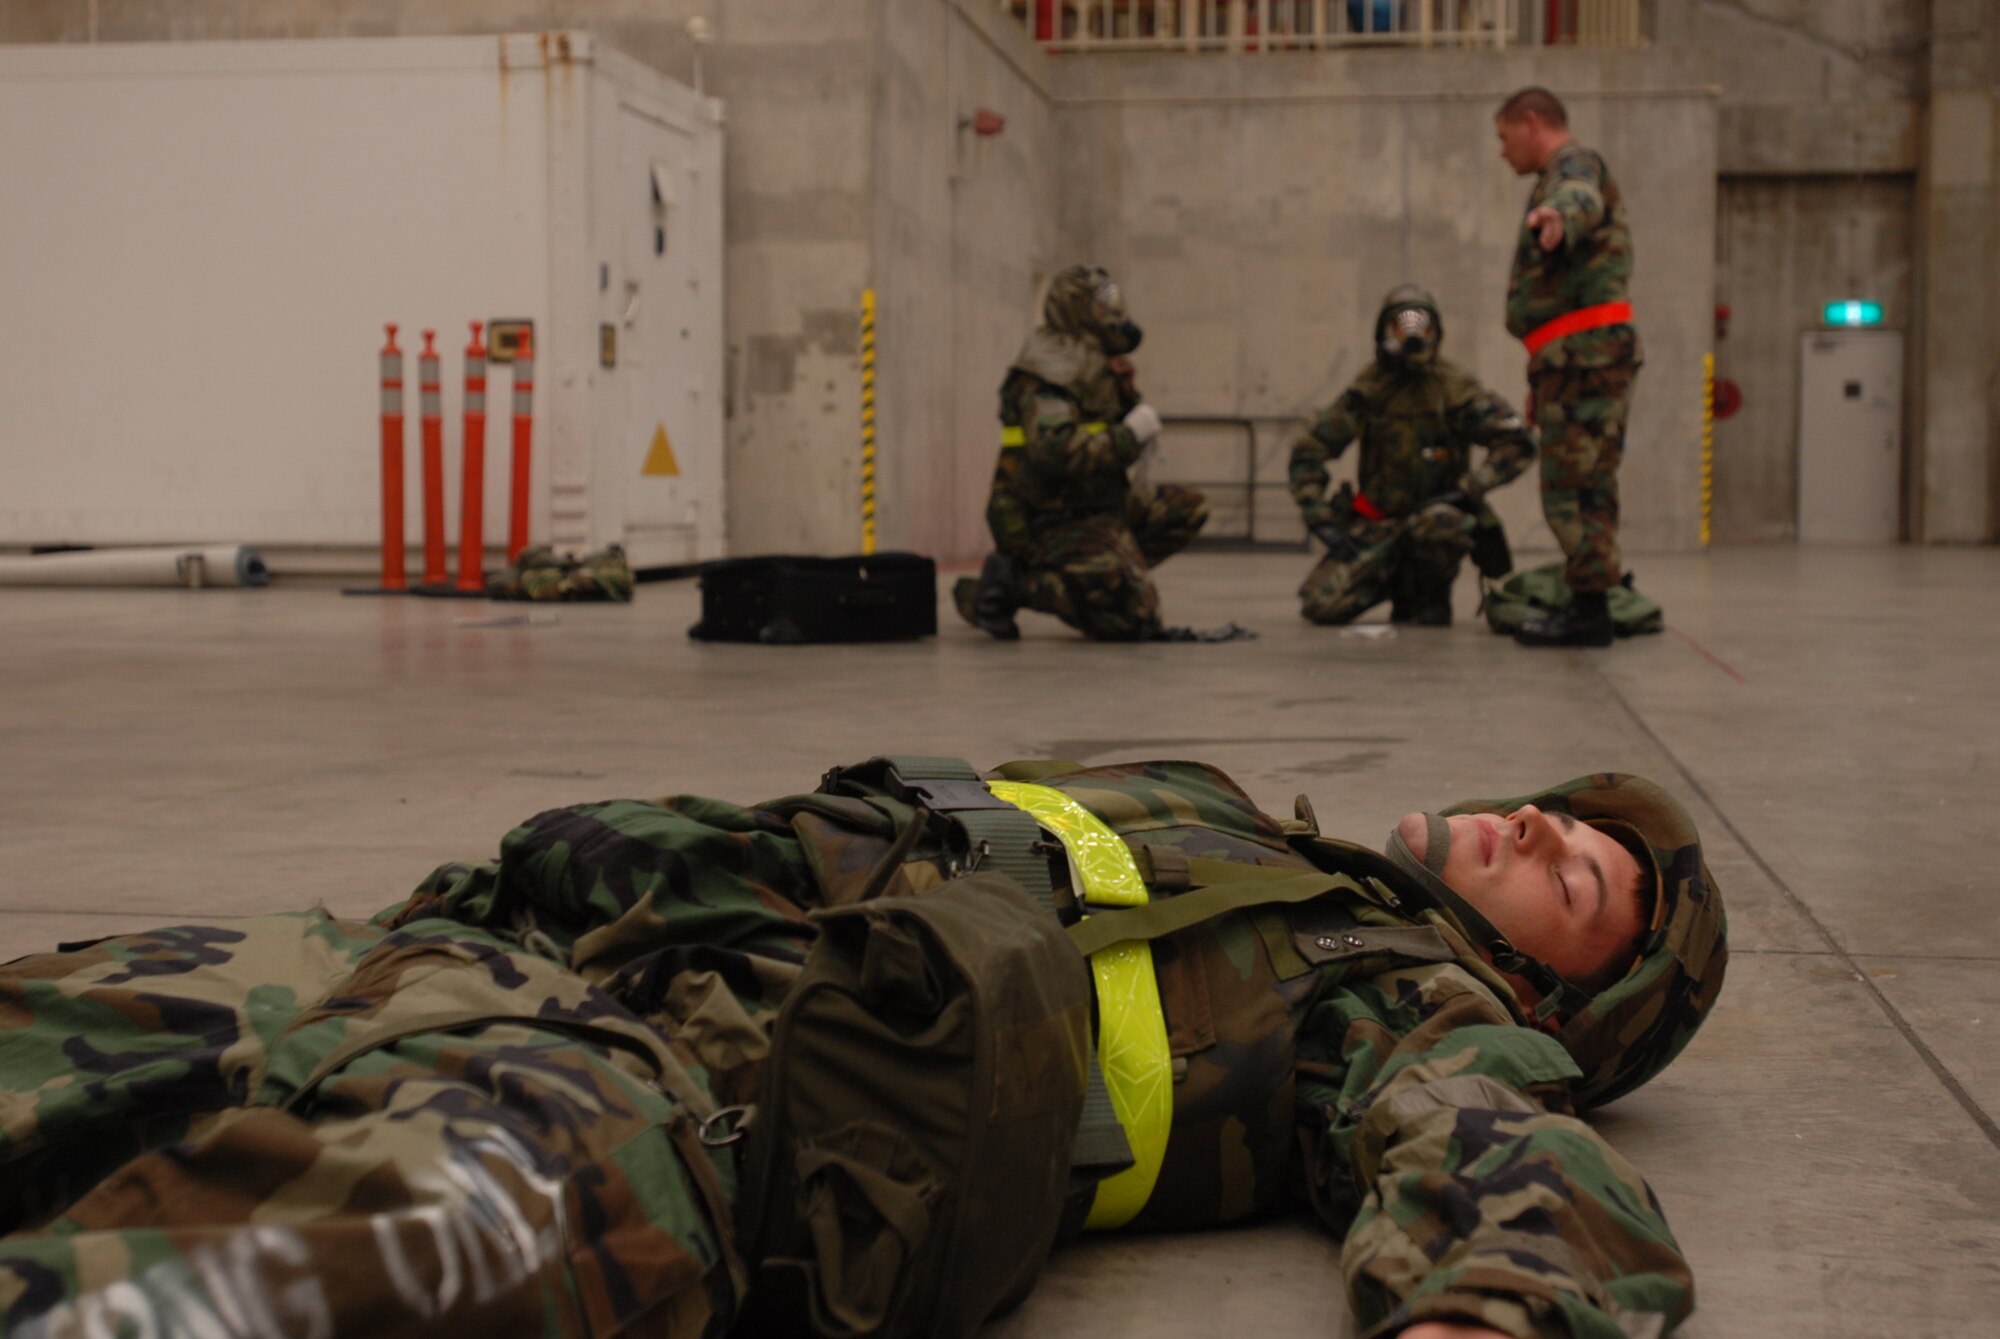 Senior Airman Tyler Willing lies and waits, while Senior Airman Victor Cross and Tech. Sgt Forest Sell receive their inject for the auto-injector scenario from Exercise Evaluation Member Master Sgt. Jefferson Baggett during Local Operational Readiness Exercise Beverly High 08-2 at Kadena Air Base, Japan, Dec. 4, 2007. These scenarios enable base agencies to work together, mitigate real-world situations, and heighten readiness capabilities.
(U.S. Air Force photo/Staff Sgt. Chrissy FitzGerald)
